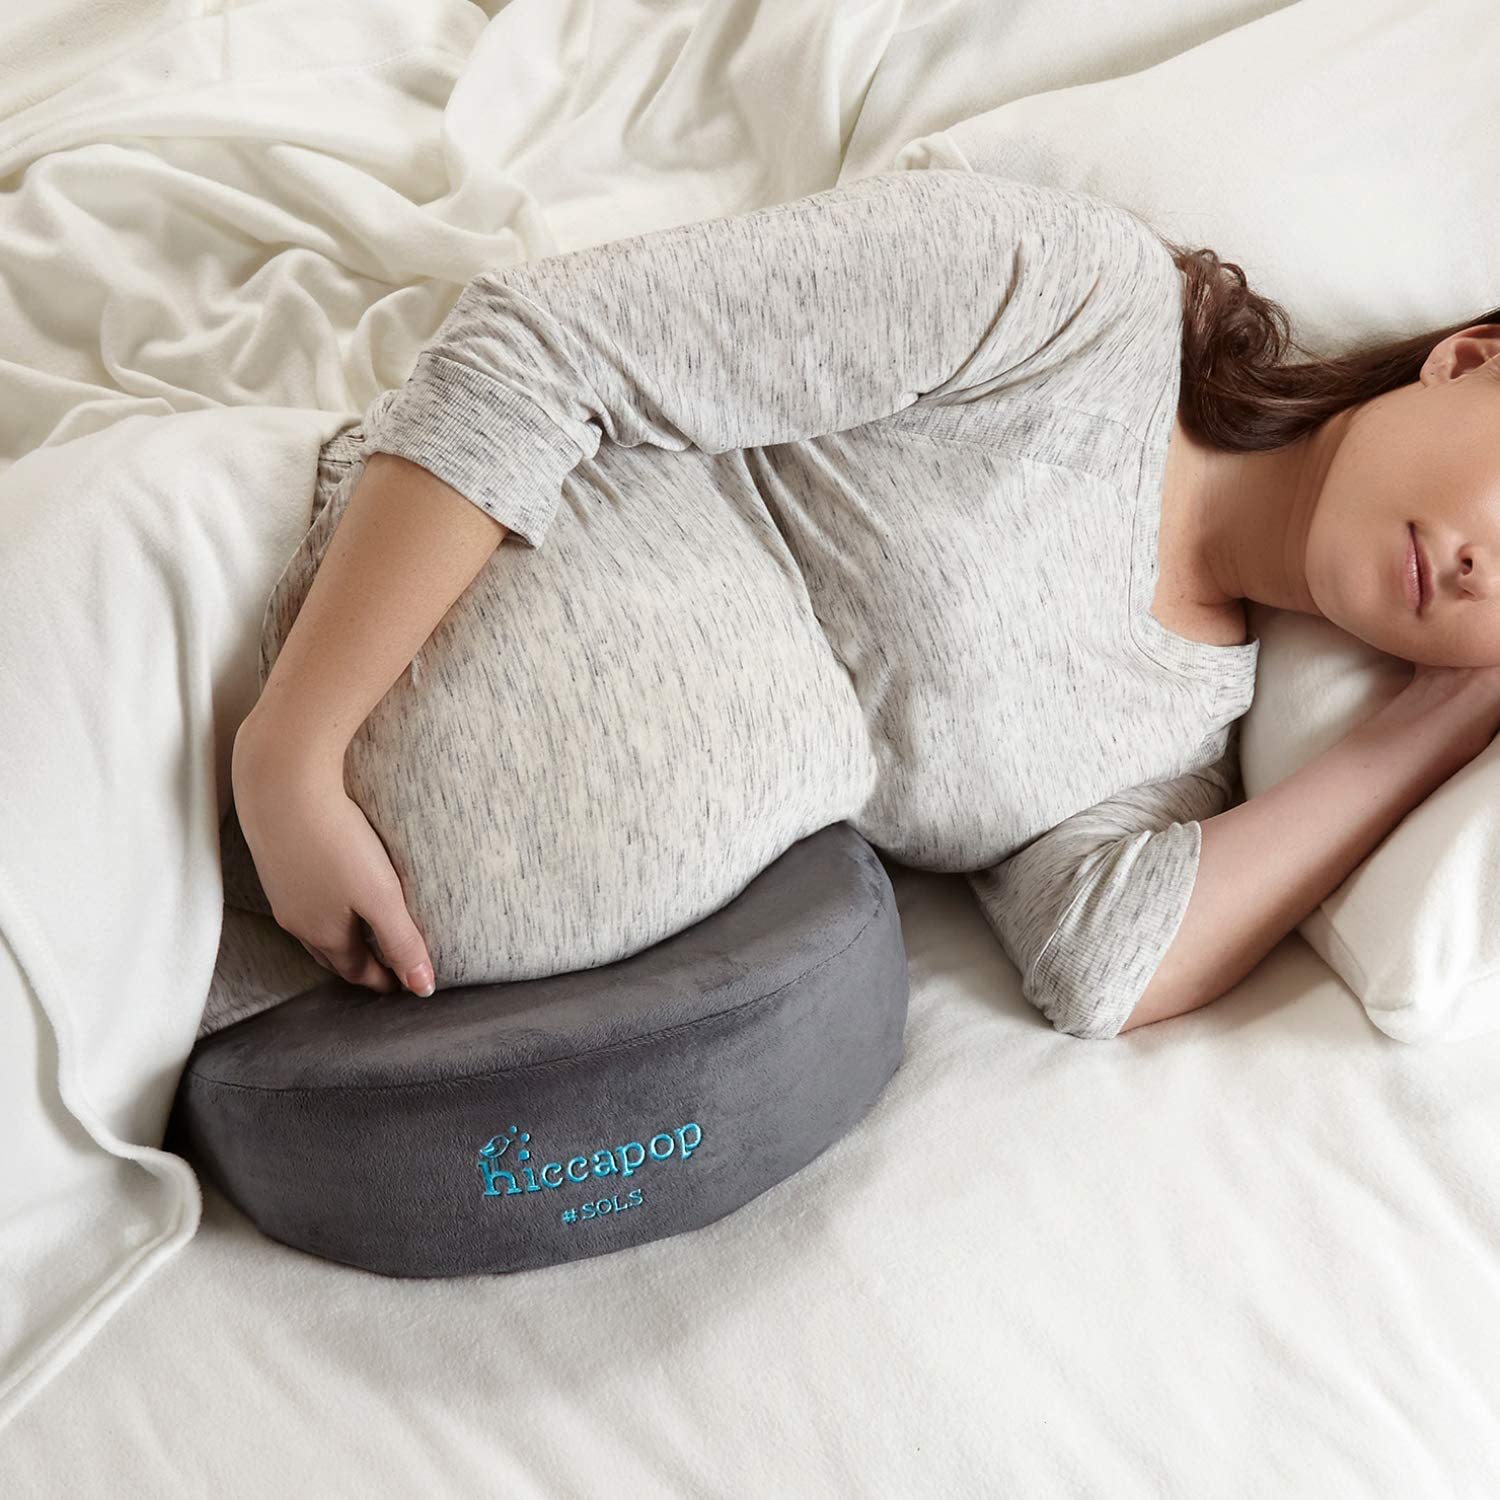 Pregnancy maternity pillow wedge for belly support maternity Wedge Pillow